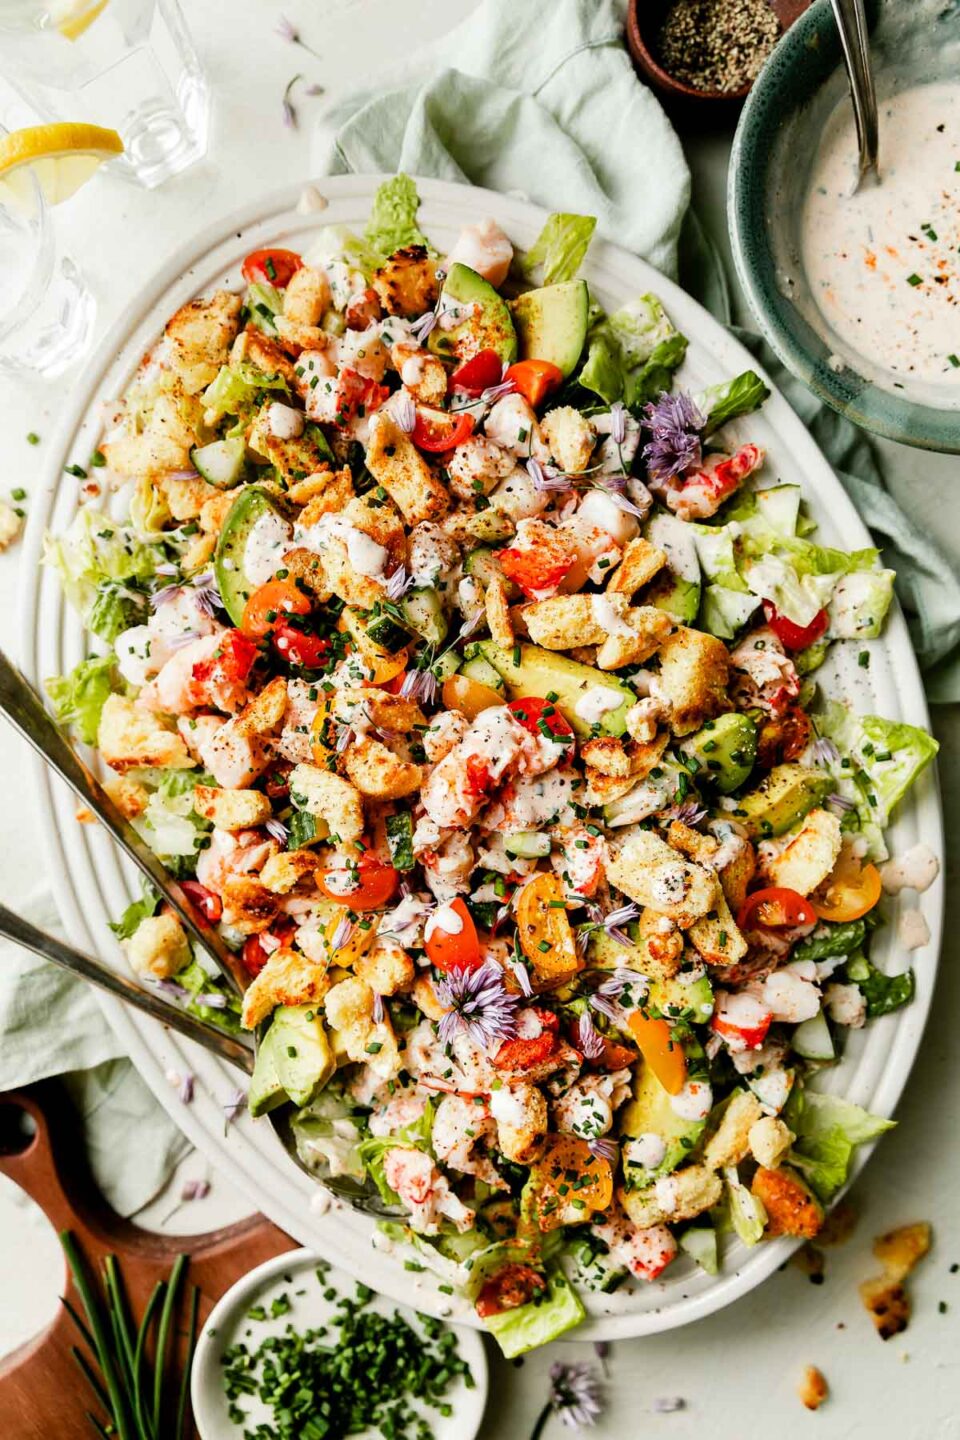 An overhead shot of a white oval platter of lobster salad atop a green cloth on a white textured surface. A small green bowl of dressing, two glasses of water and small dishes of chives and pepper sit alongside the platter.